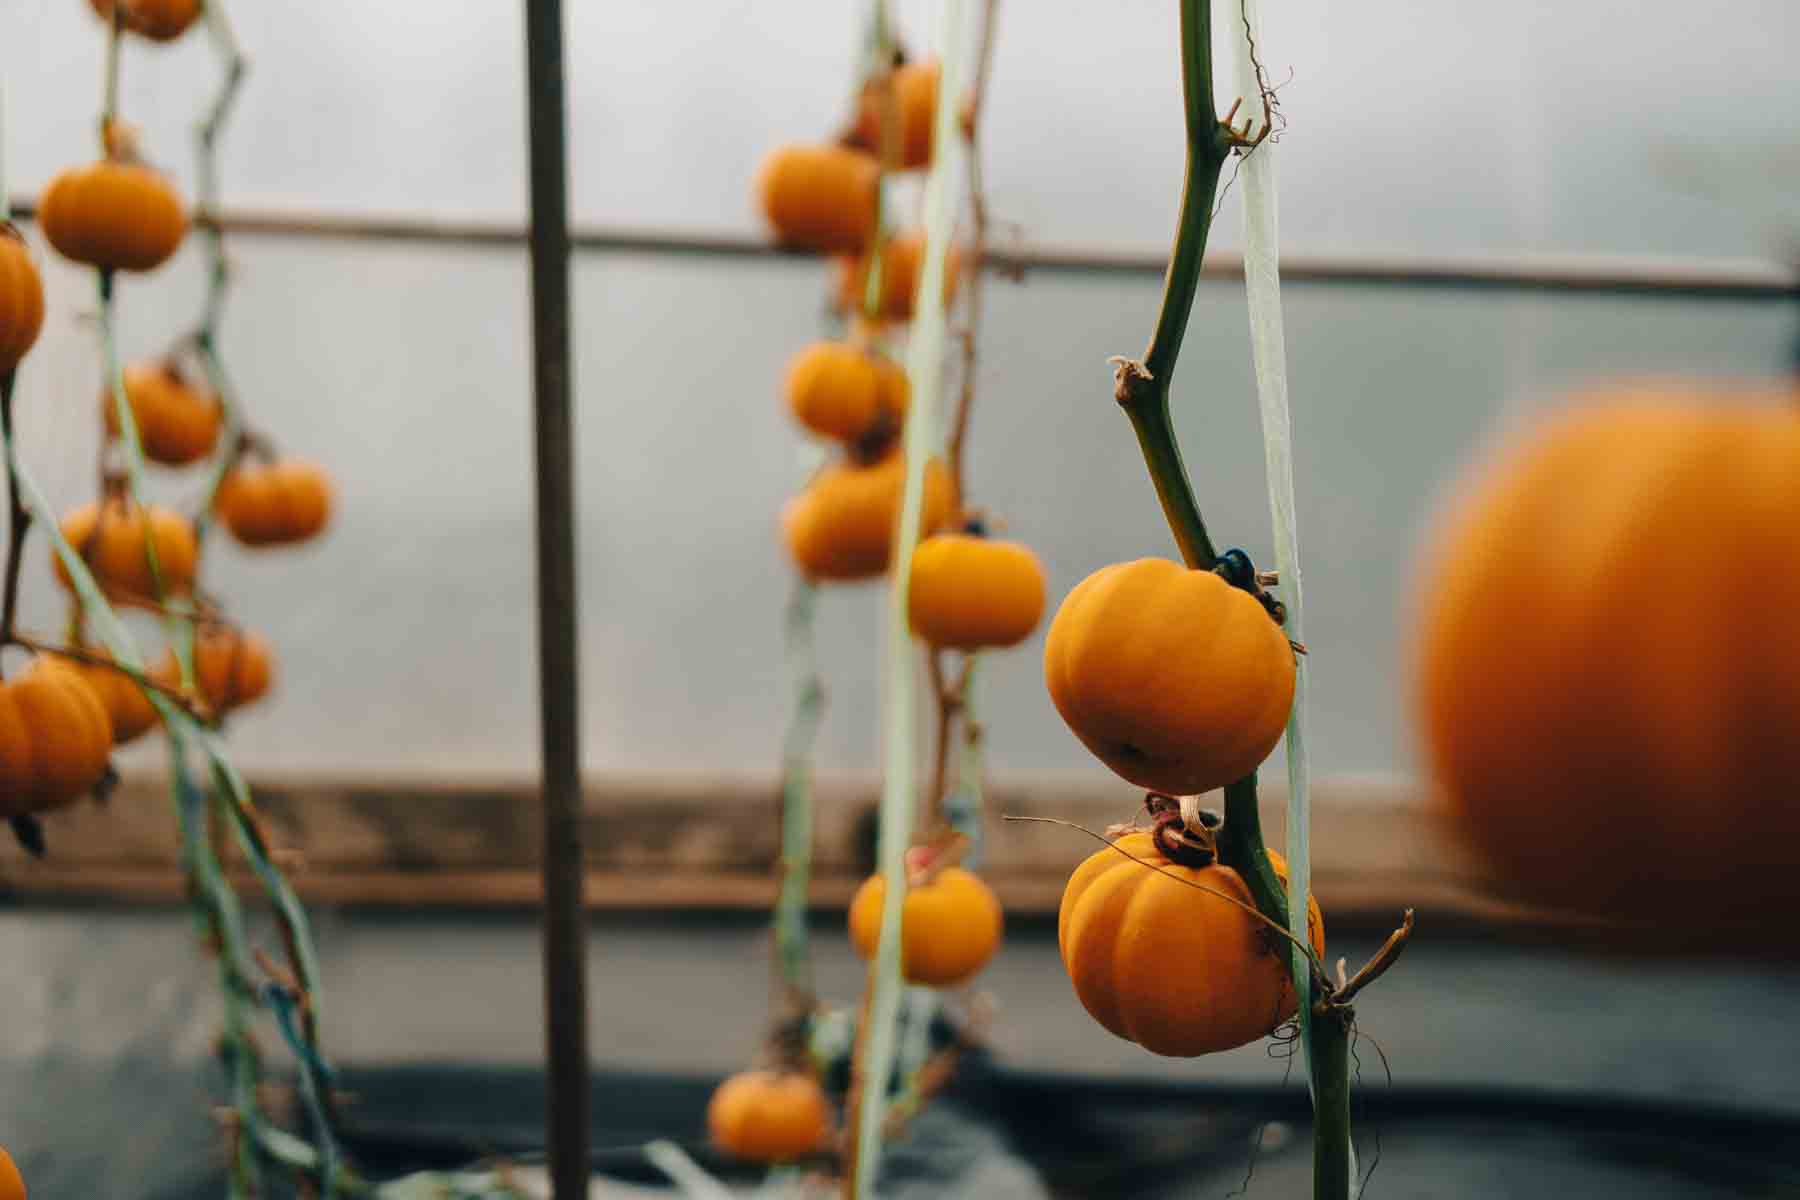 Small bright orange pumpkins growing up sturdy, staked supports inside of a greenhouse.